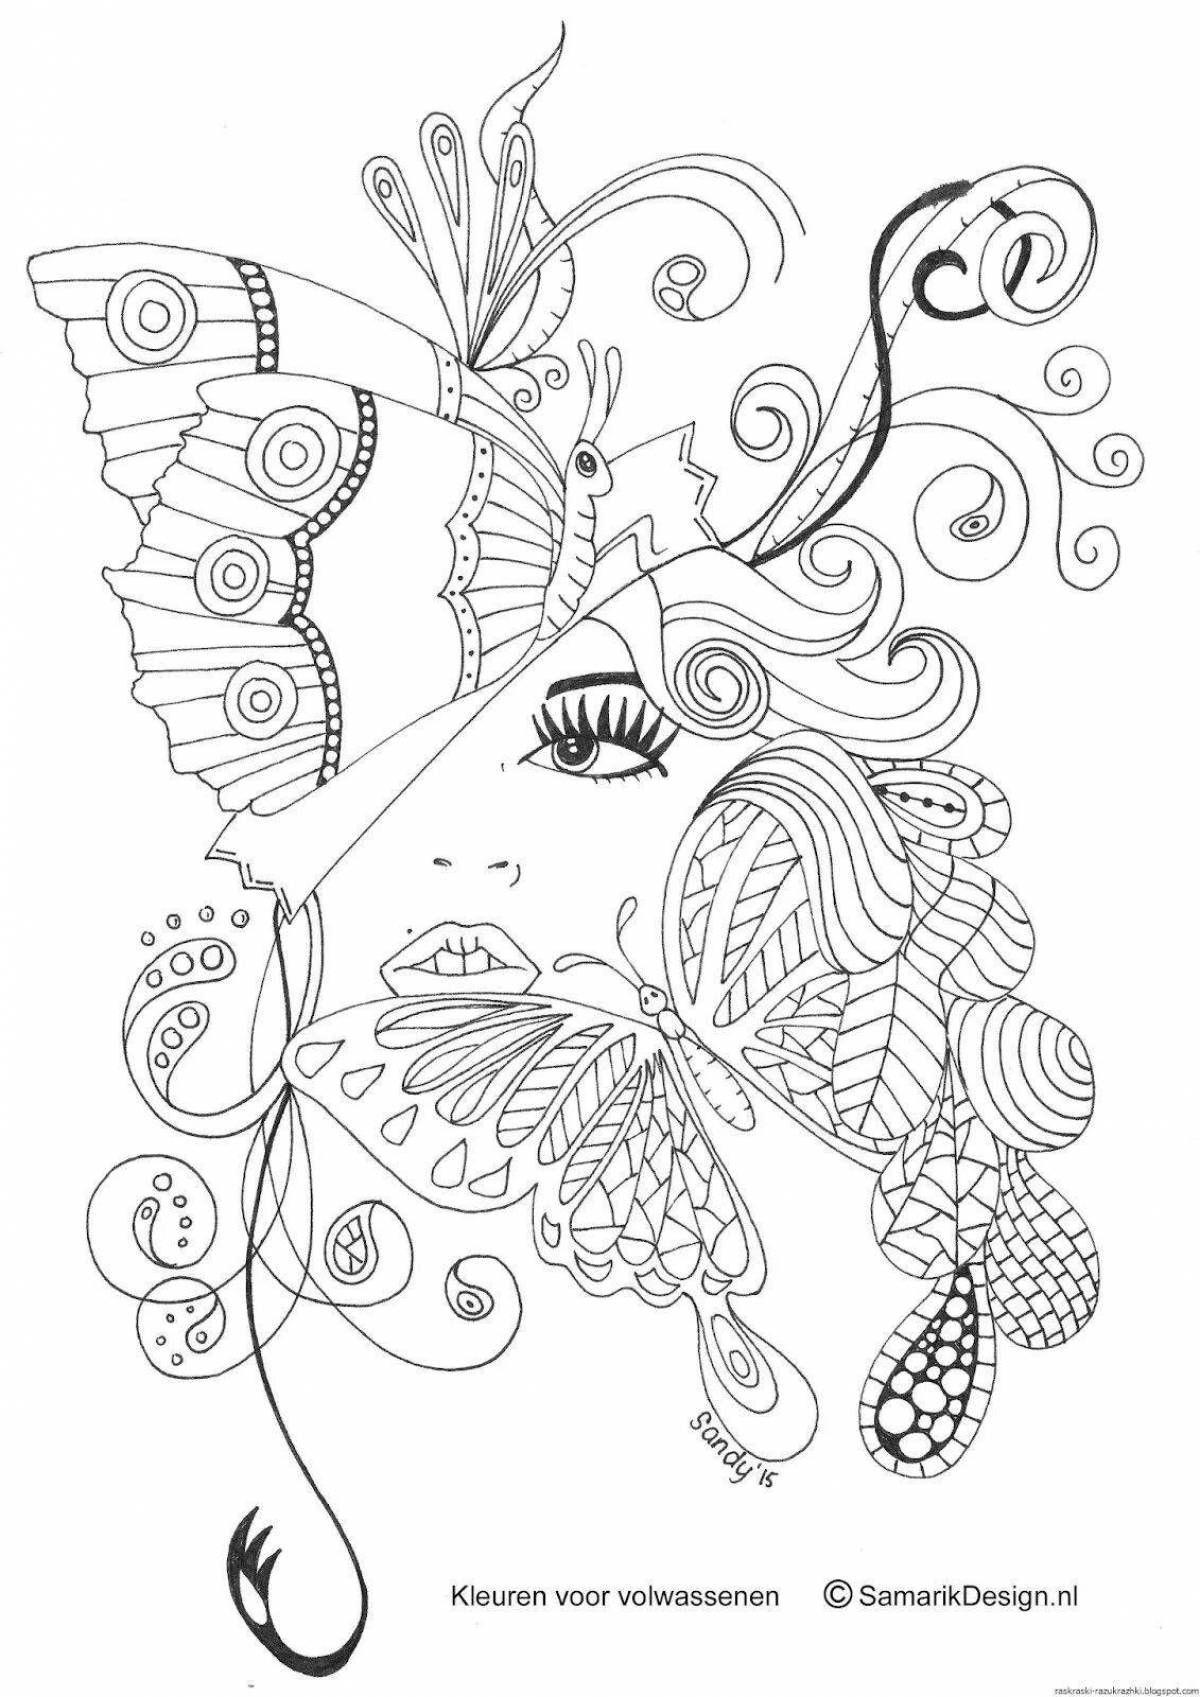 Delightful simple coloring book for adults